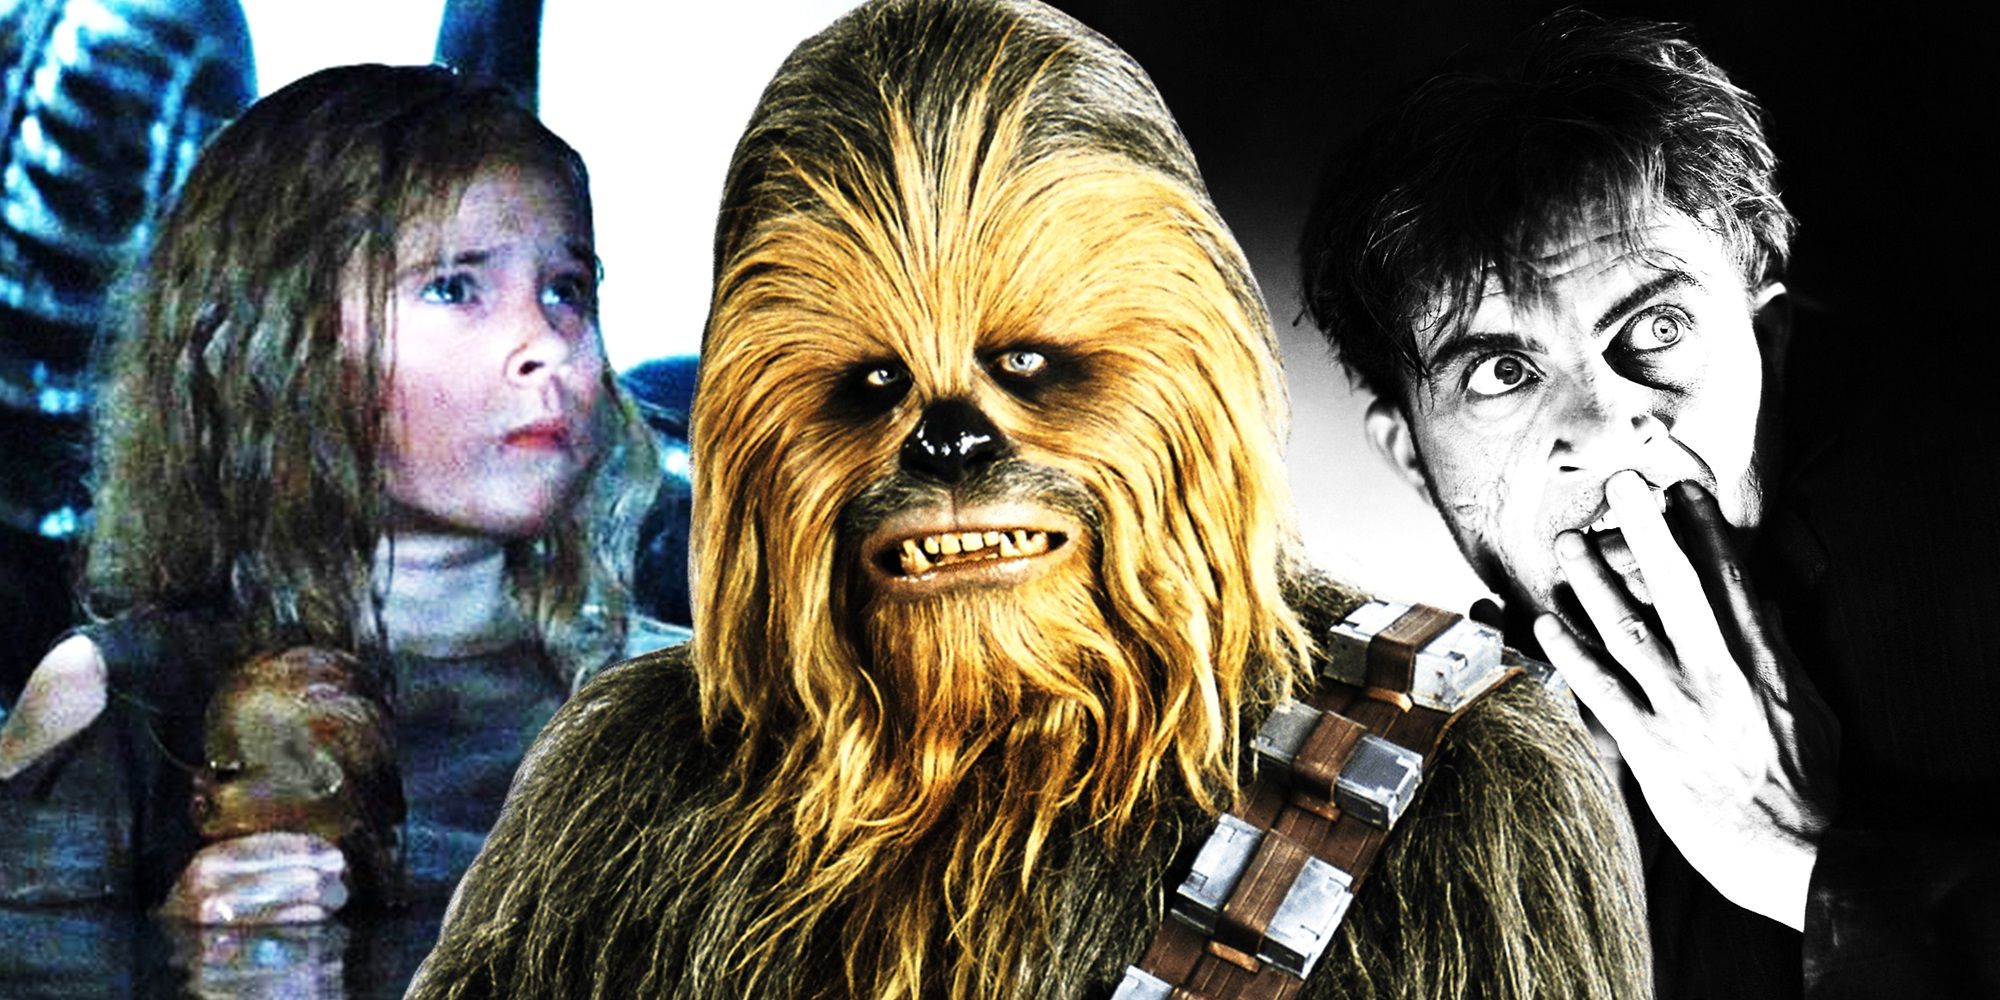 Collage of Newt in Aliens, Chewbacca in Star Wars, and Fritz in Frankenstein